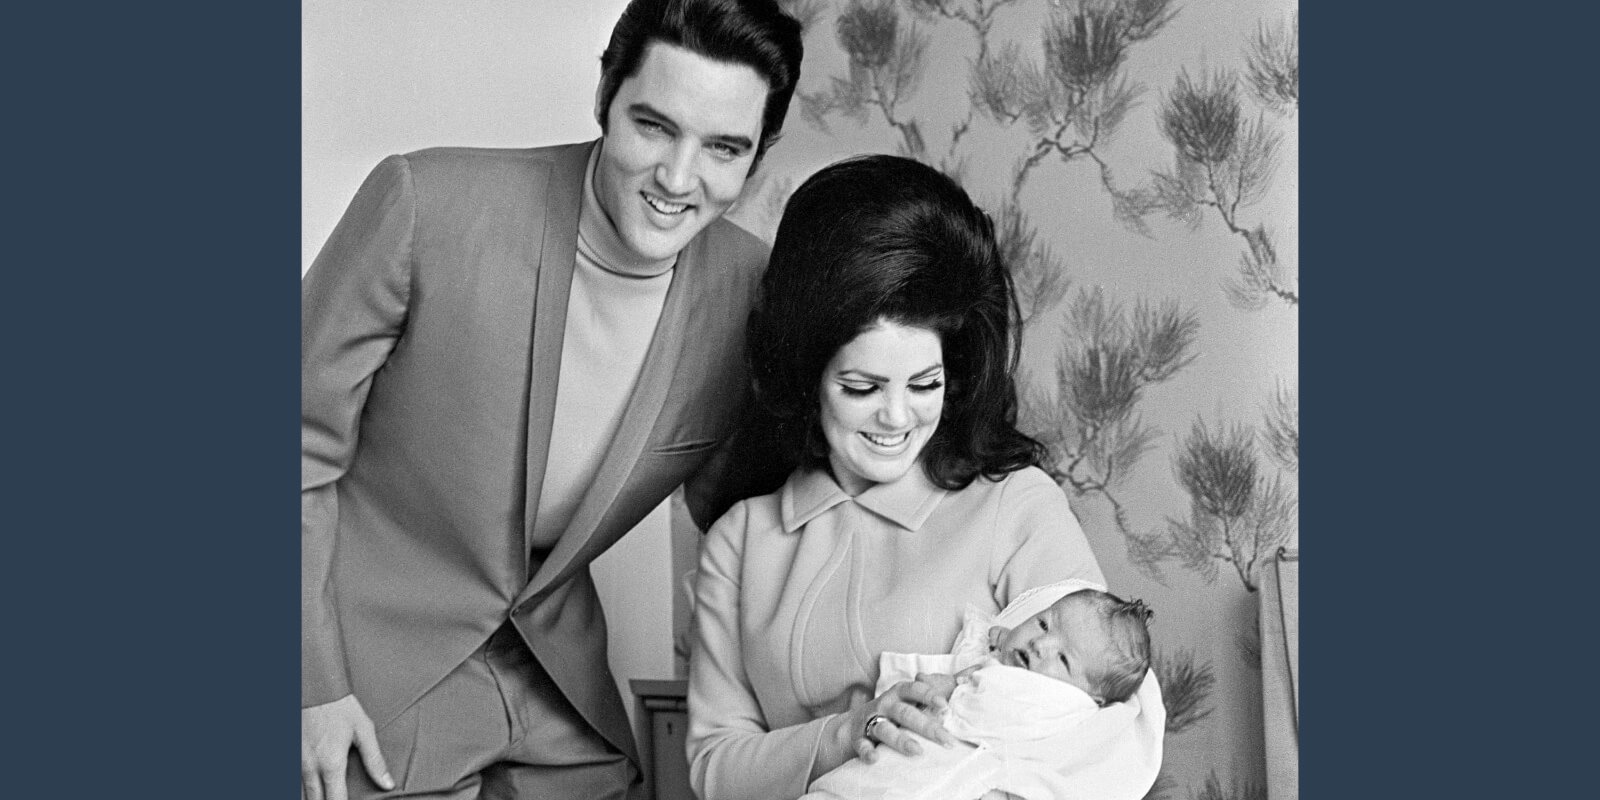 Elvis Presley and Priscilla in Feb. 1968 after Lisa Marie's birth.